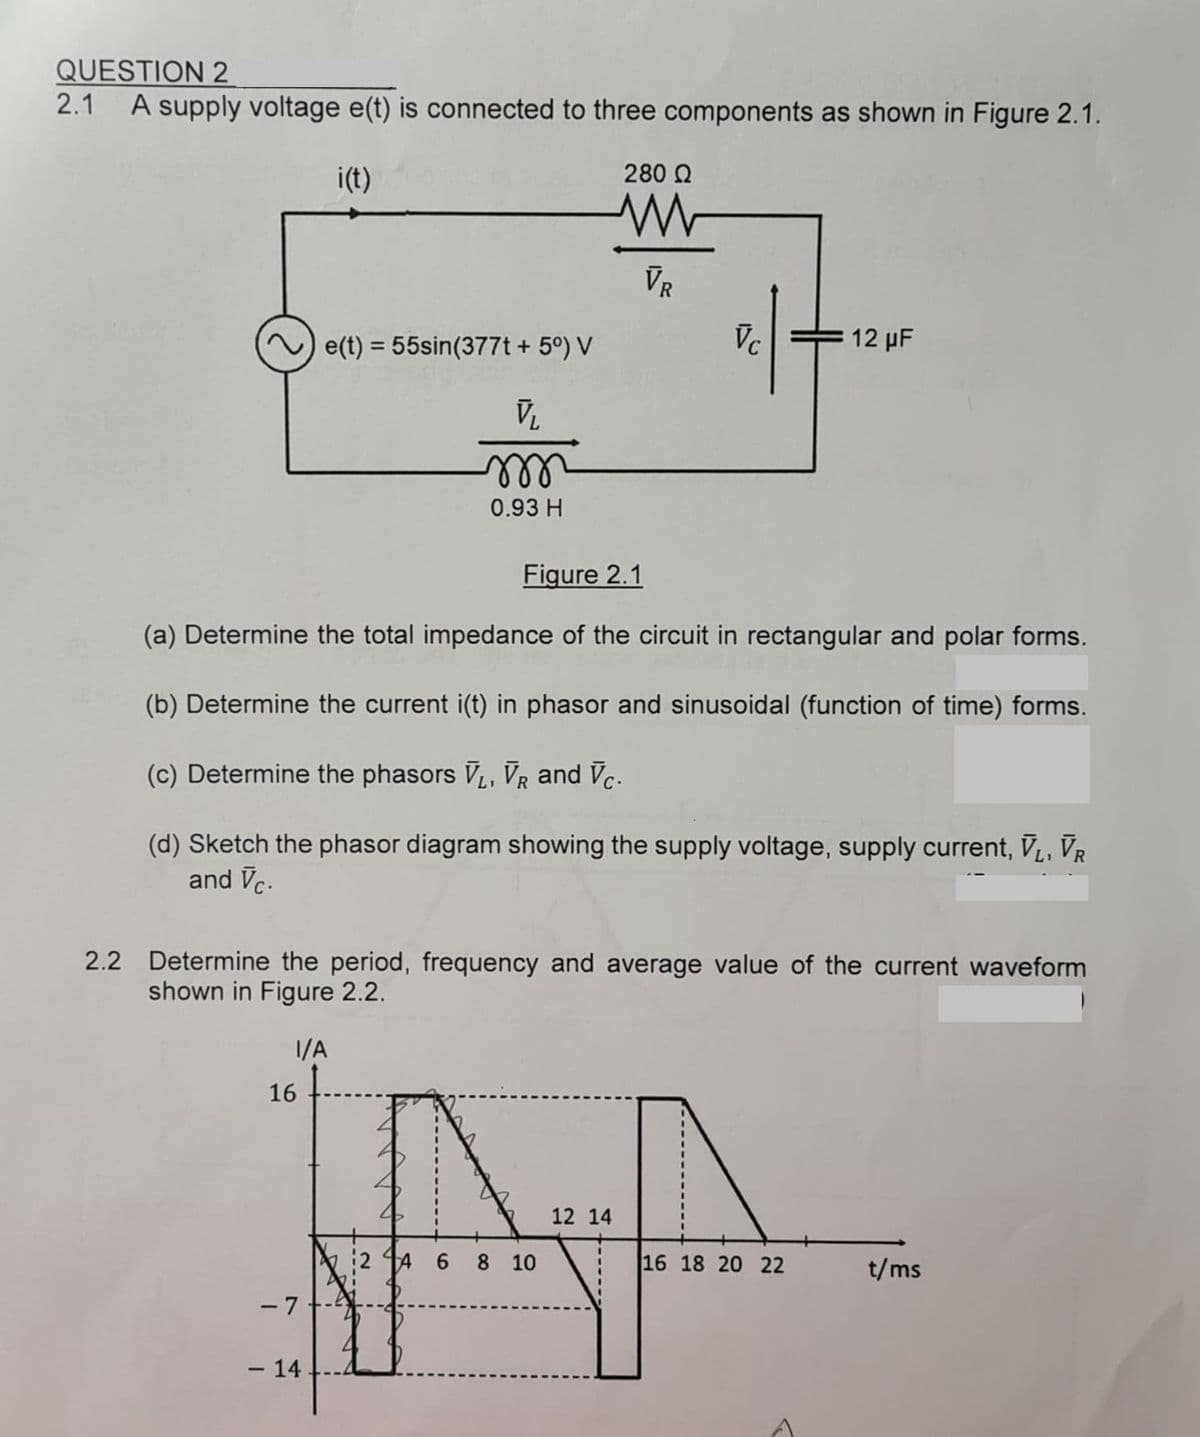 QUESTION 2
2.1
A supply voltage e(t) is connected to three components as shown in Figure 2.1.
i(t)
280 Q
VR
e(t) = 55sin(377t + 5°) V
Vc
12 µF
%3D
ll
0.93 H
Figure 2.1
(a) Determine the total impedance of the circuit in rectangular and polar forms.
(b) Determine the current i(t) in phasor and sinusoidal (function of time) forms.
(c) Determine the phasors V, VR and Vc.
(d) Sketch the phasor diagram showing the supply voltage, supply current, V, VR
and Vc.
2.2 Determine the period, frequency and average value of the current waveform
shown in Figure 2.2.
1/A
16
12 14
2 14 6
8.
10
16 18 20 22
t/ms
- 7
– 14
